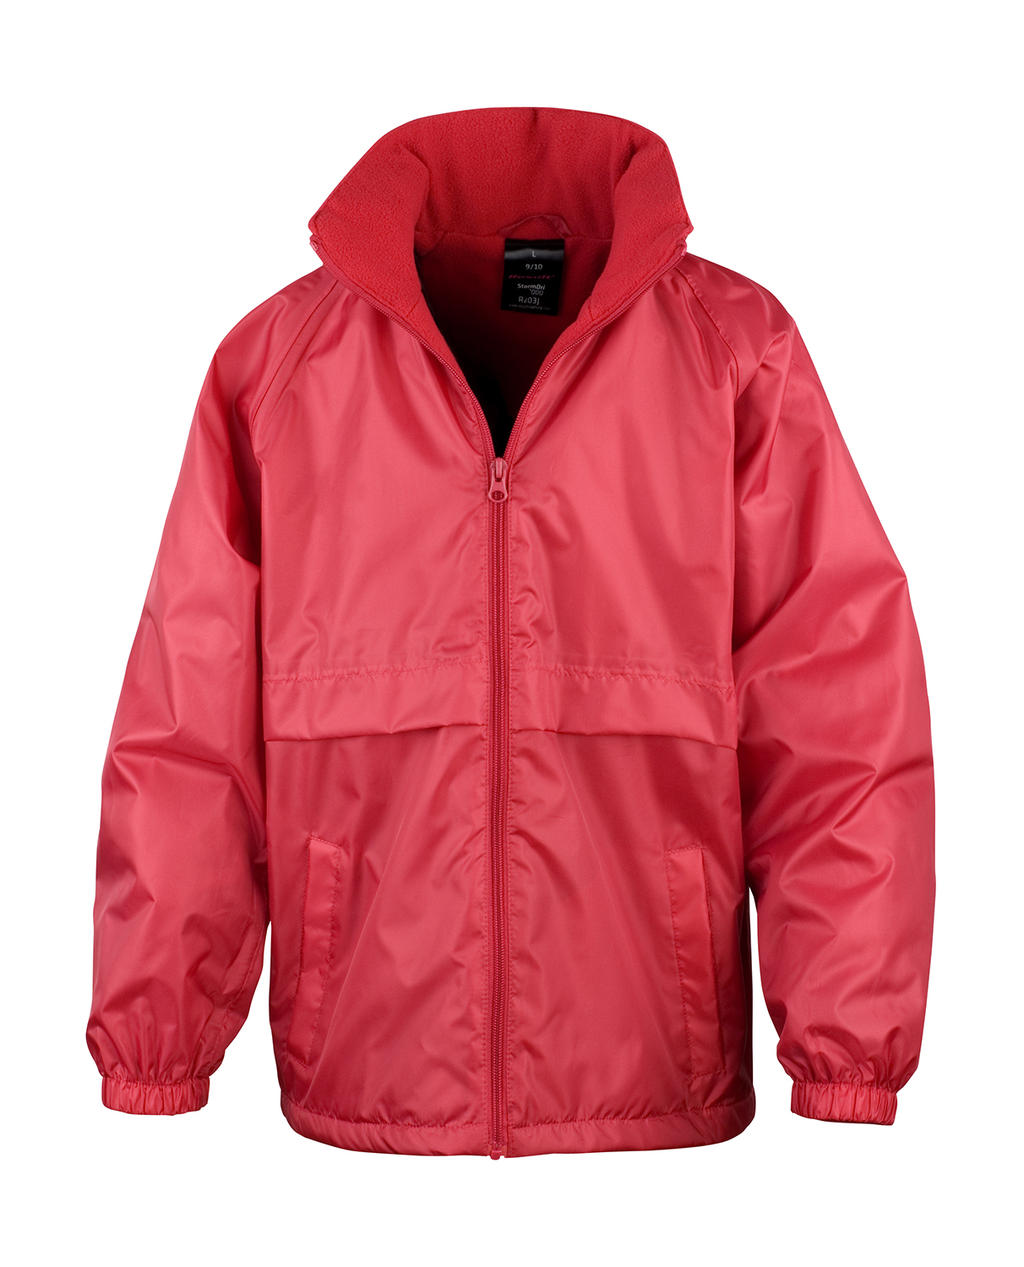  CORE Junior Microfleece Lined Jacket in Farbe Red